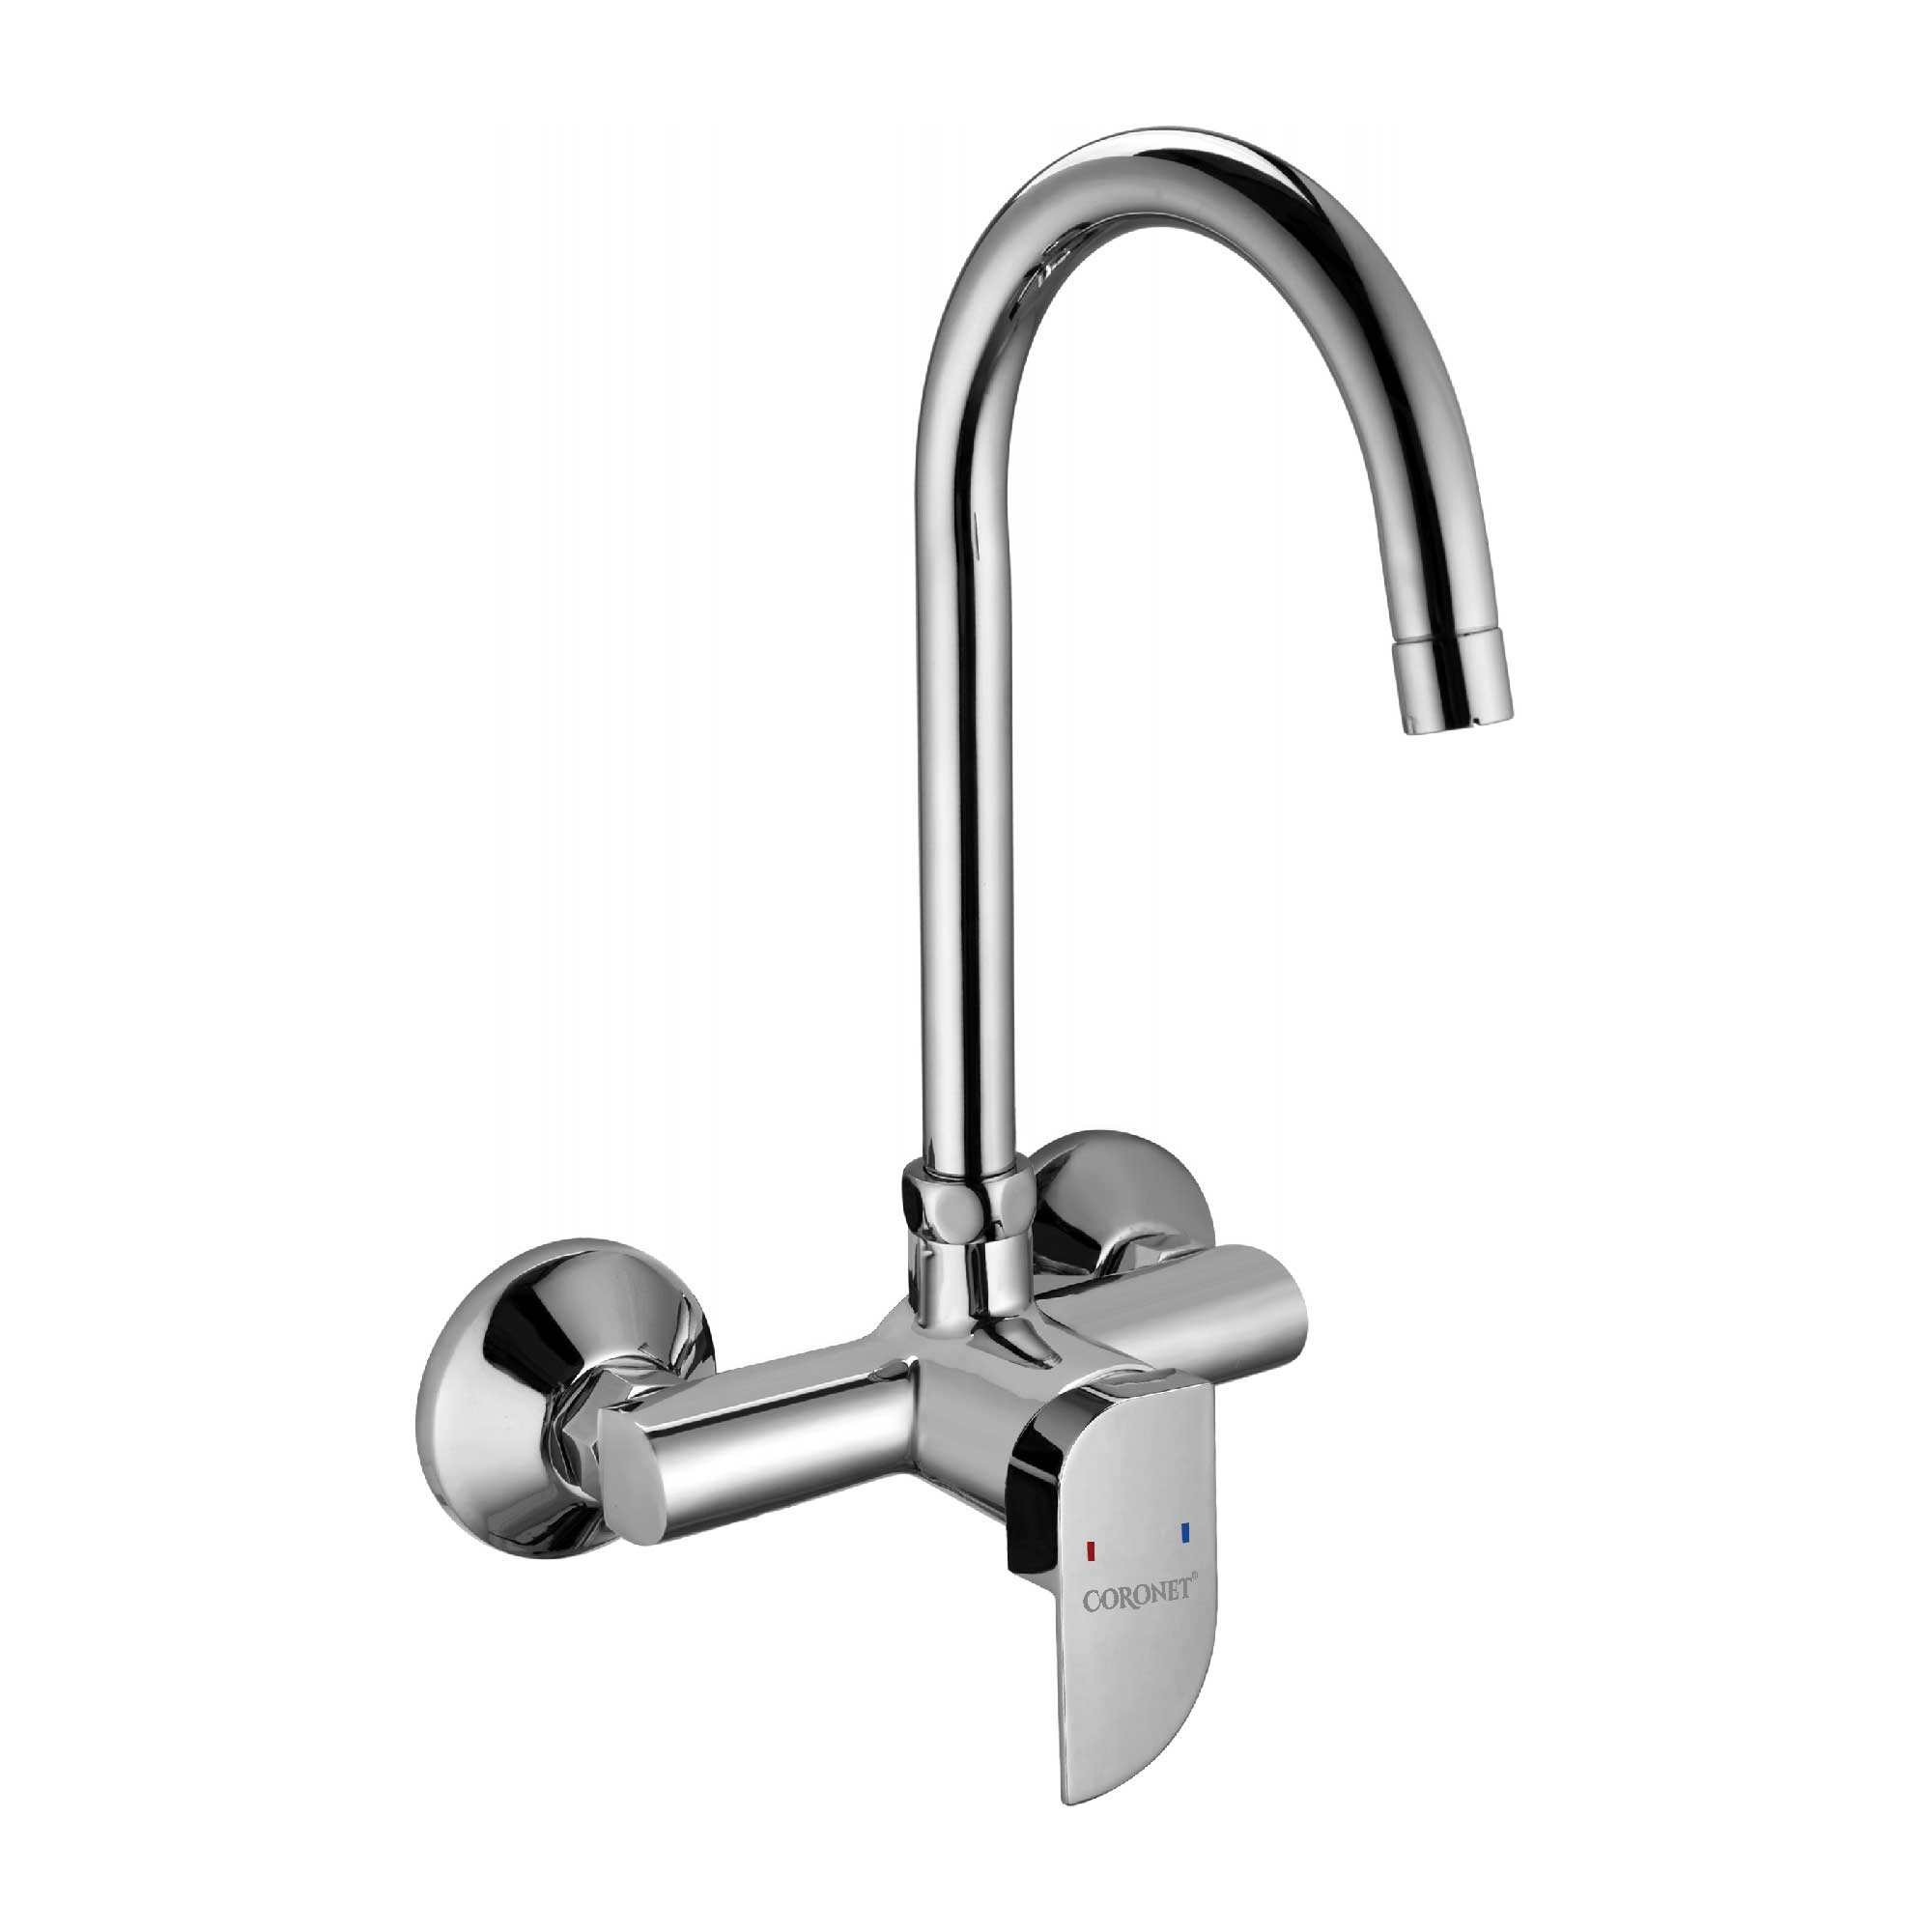 Sink Mixer Wall Mounted With Swivel Spout